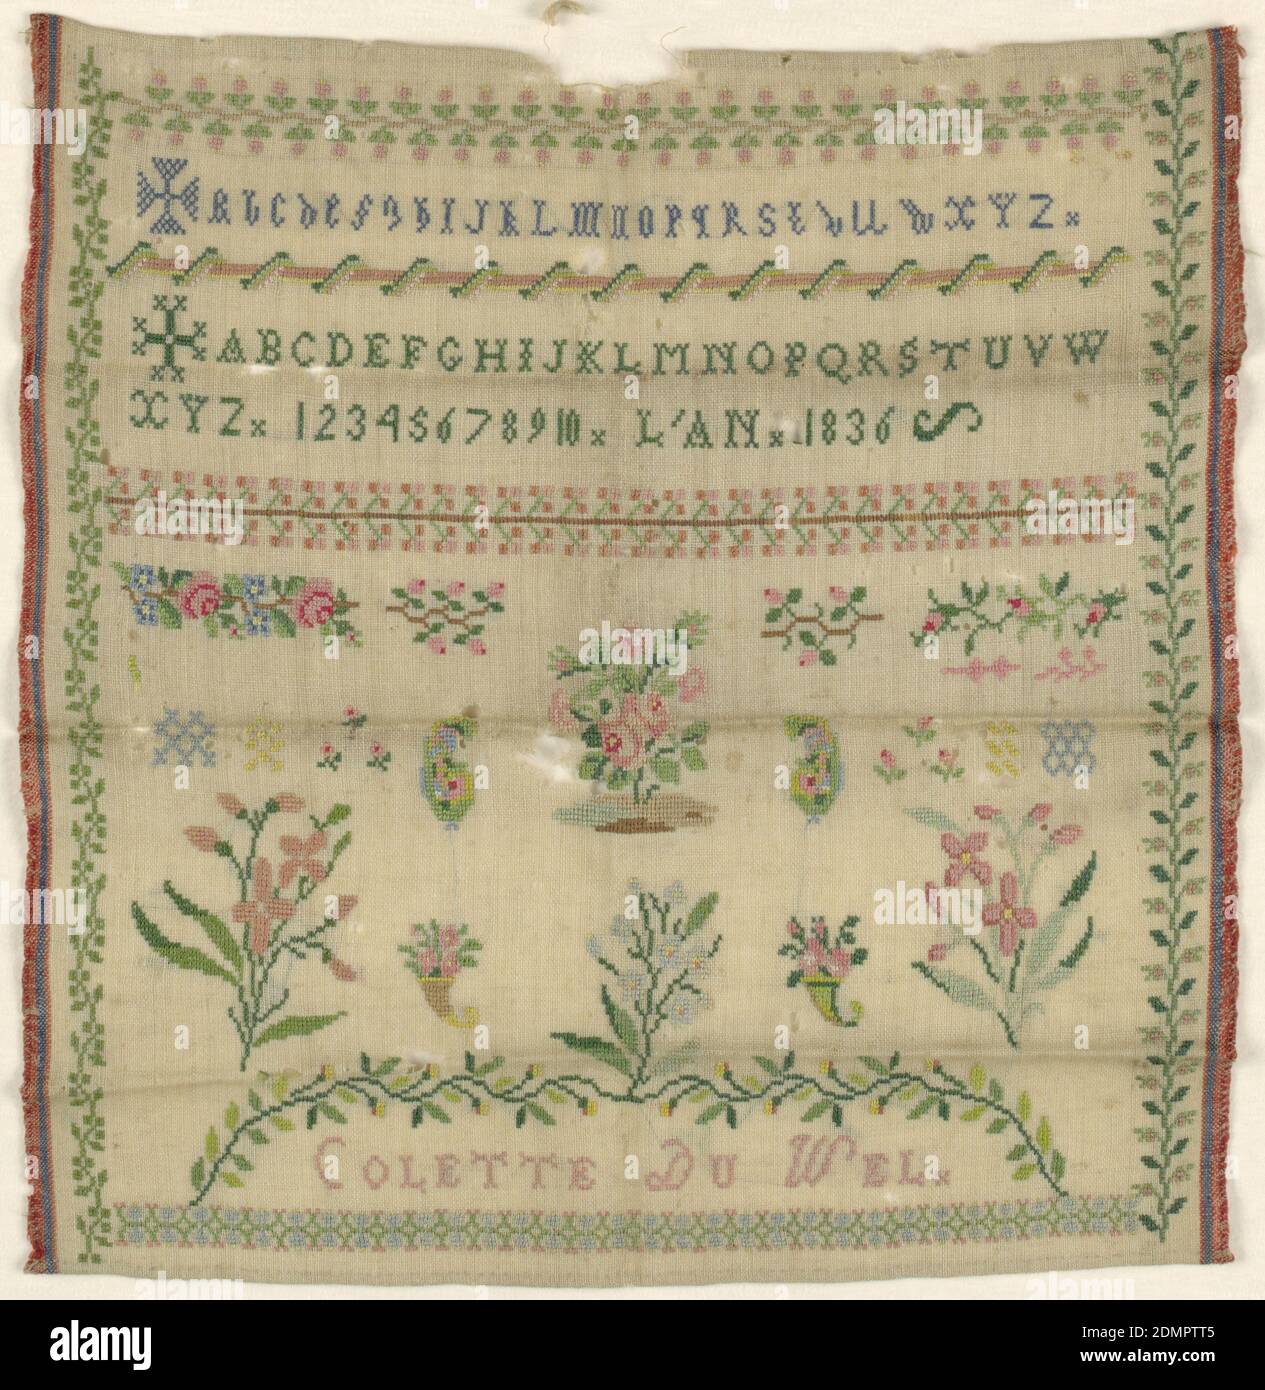 Sampler, Colette du Wel, Medium: silk embroidery on wool foundation Technique: embroidered in cross stitch (looping backward movement), on plain weave foundation, Upper third has two alphabets introduced by Maltese crosses and inscription, lower third has isolated floral motifs. Floral borders on four sides., France, 1836, embroidery & stitching, Sampler Stock Photo